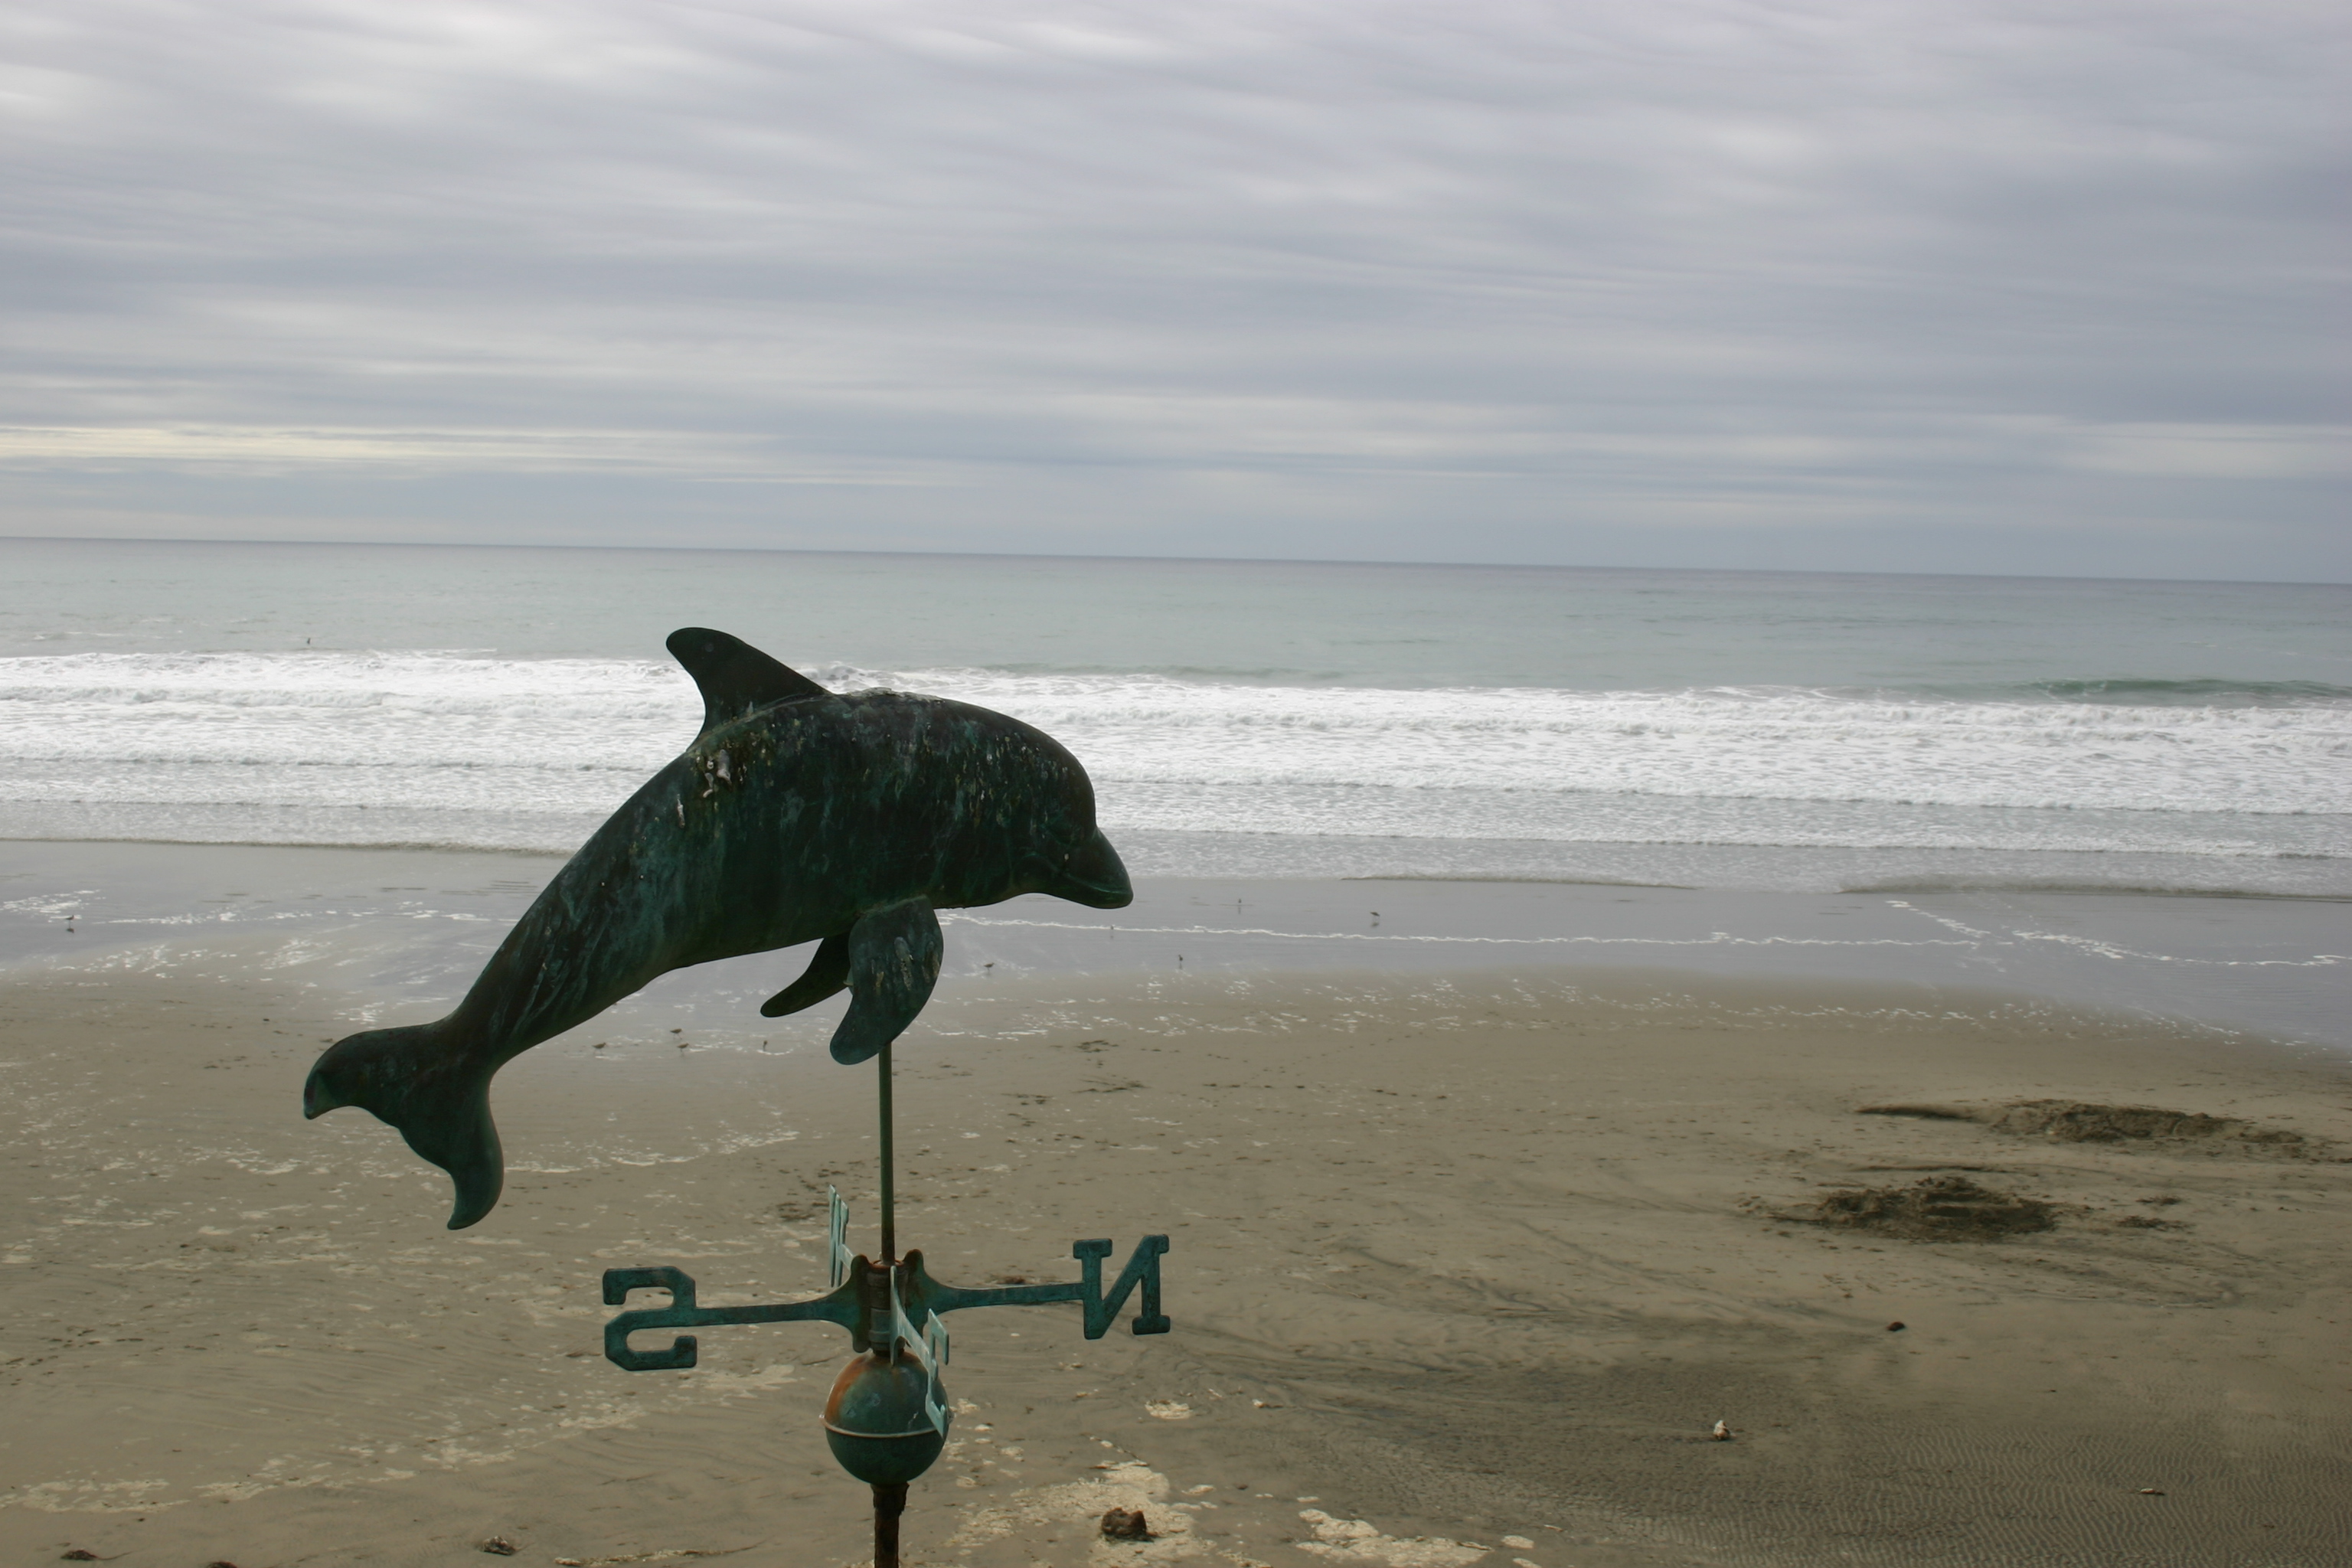 Dolphin weathervane on a lonely beach.